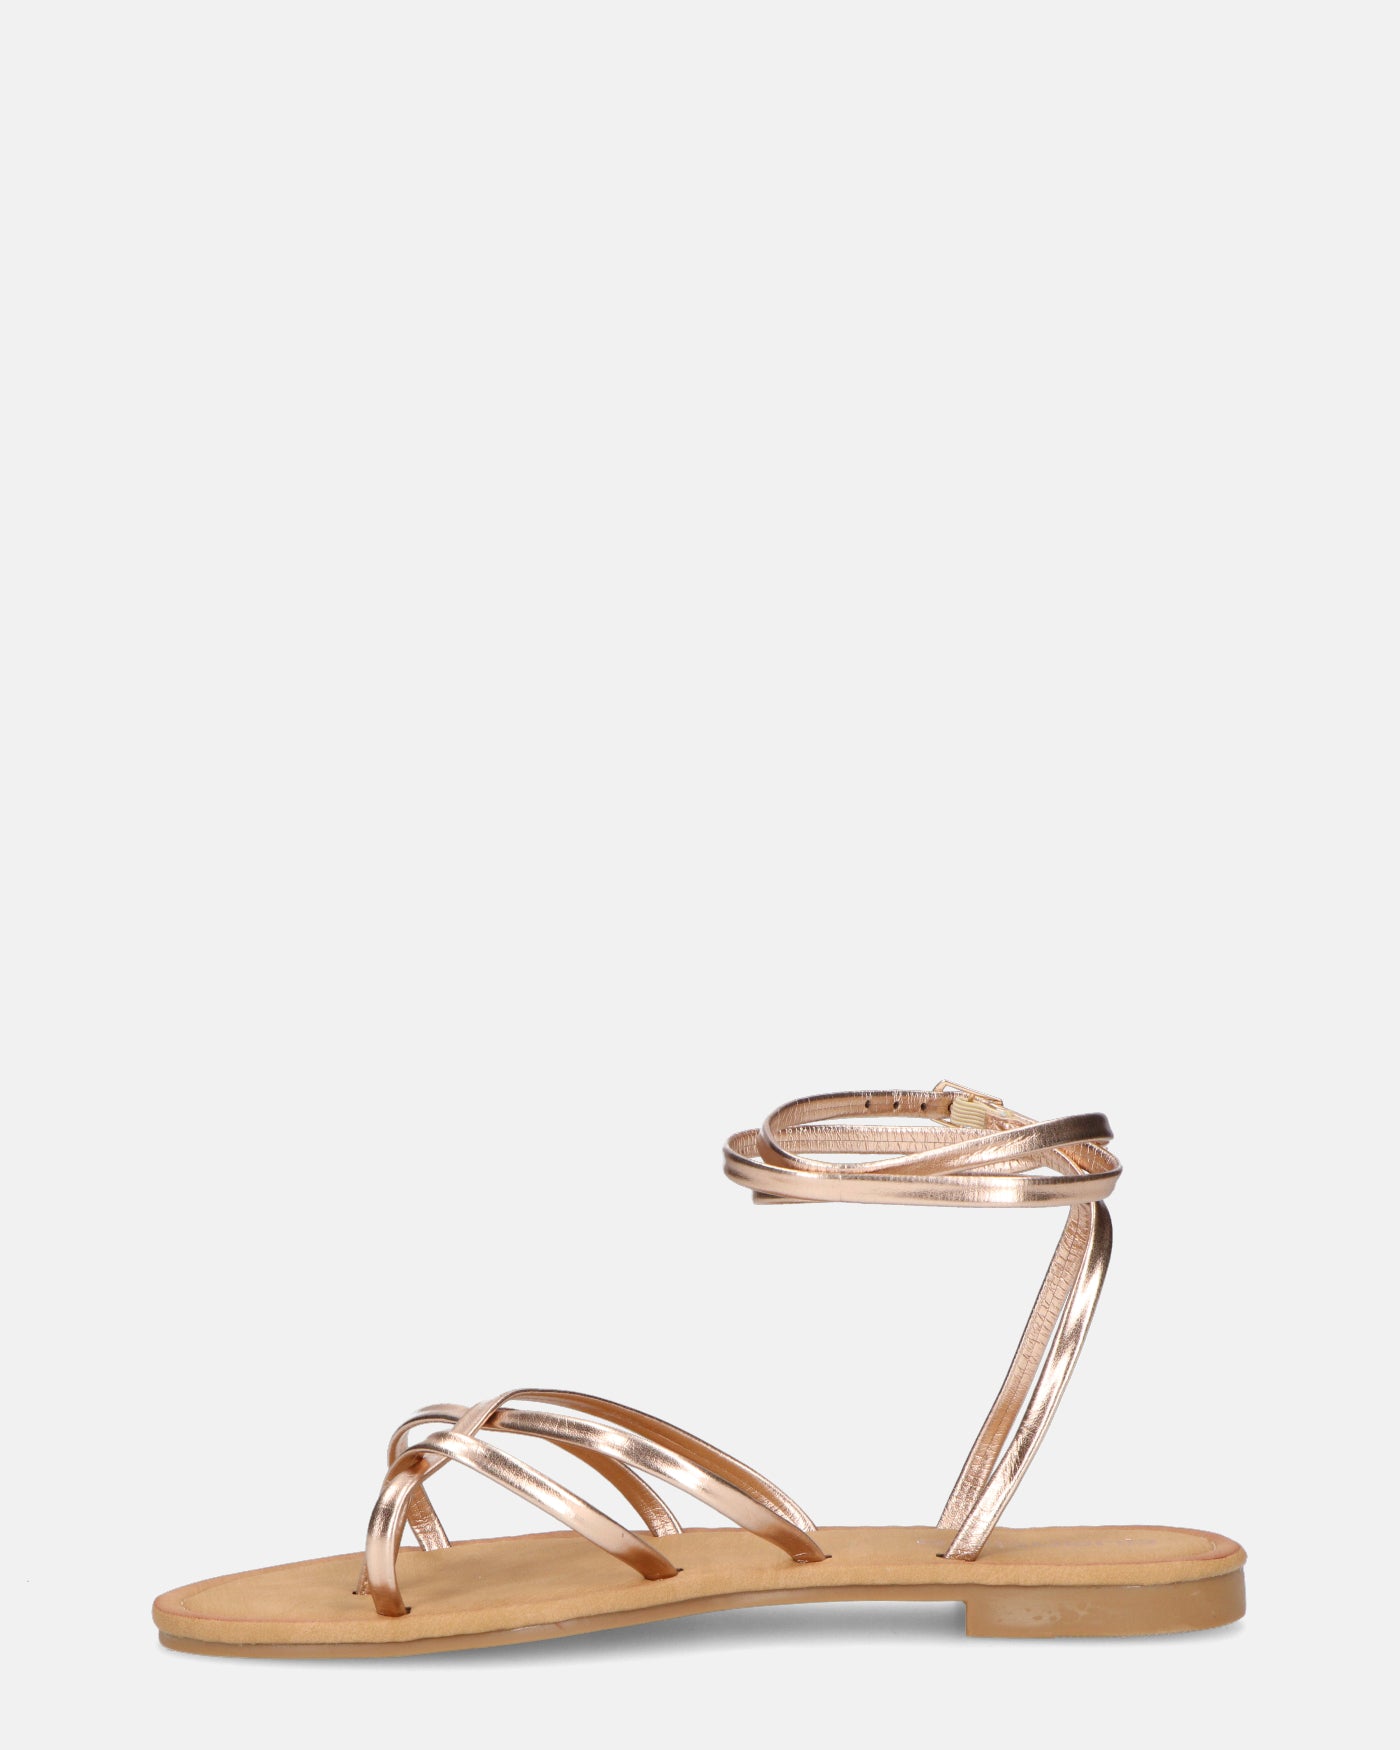 NINA - flat sandals with bronze colored strap and bands